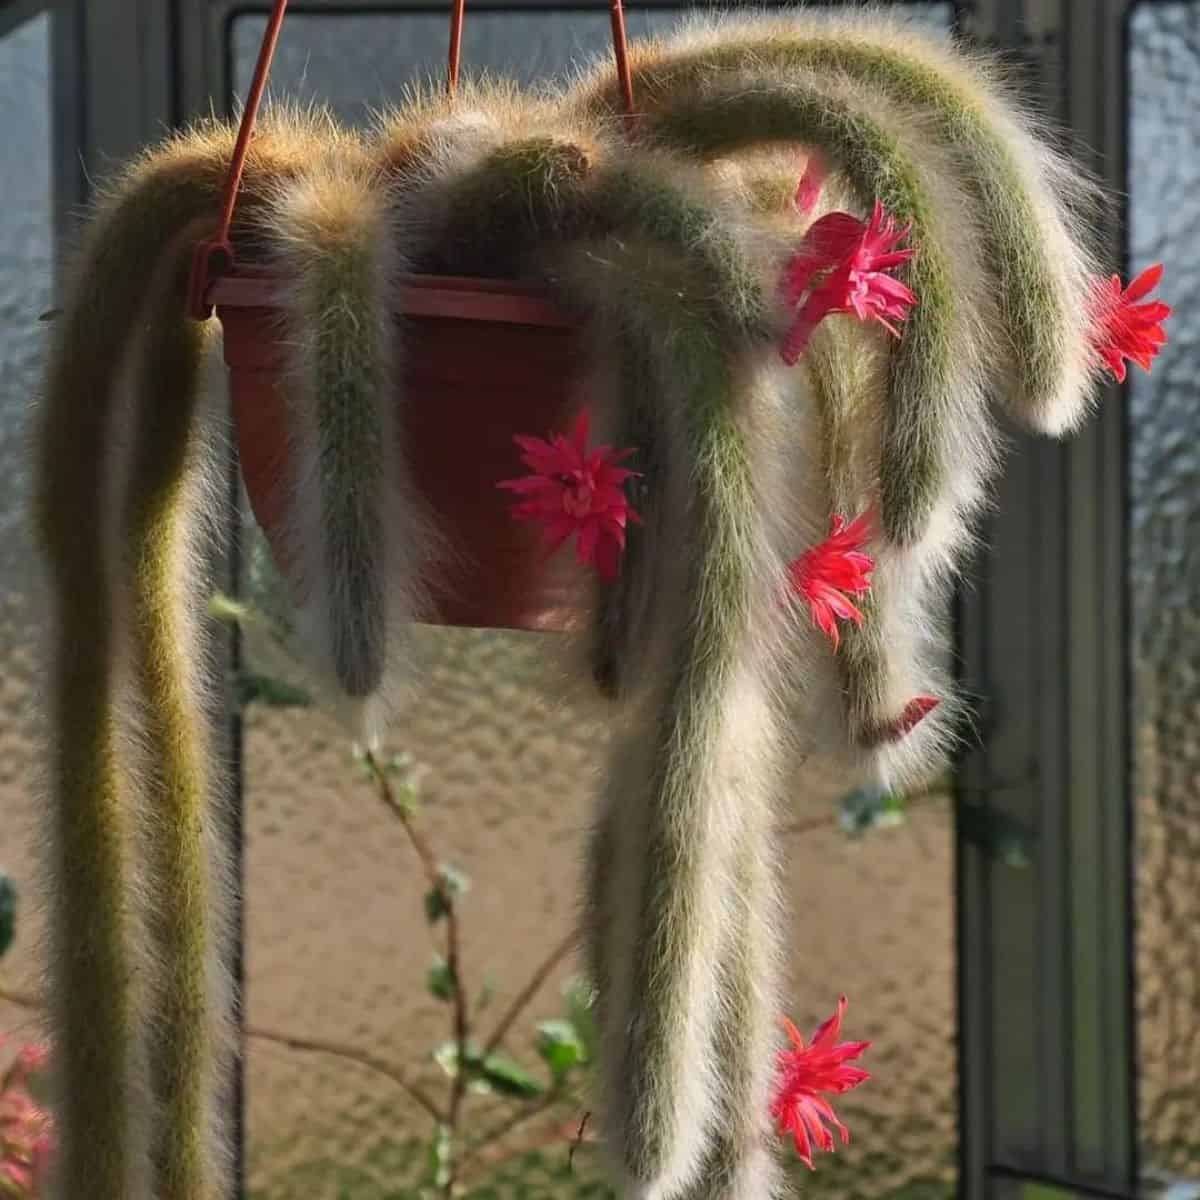 Cleistocactus winteri subs. Colademononis with fluffy foliage and vibrant-red flowers grow in a hanging pot.